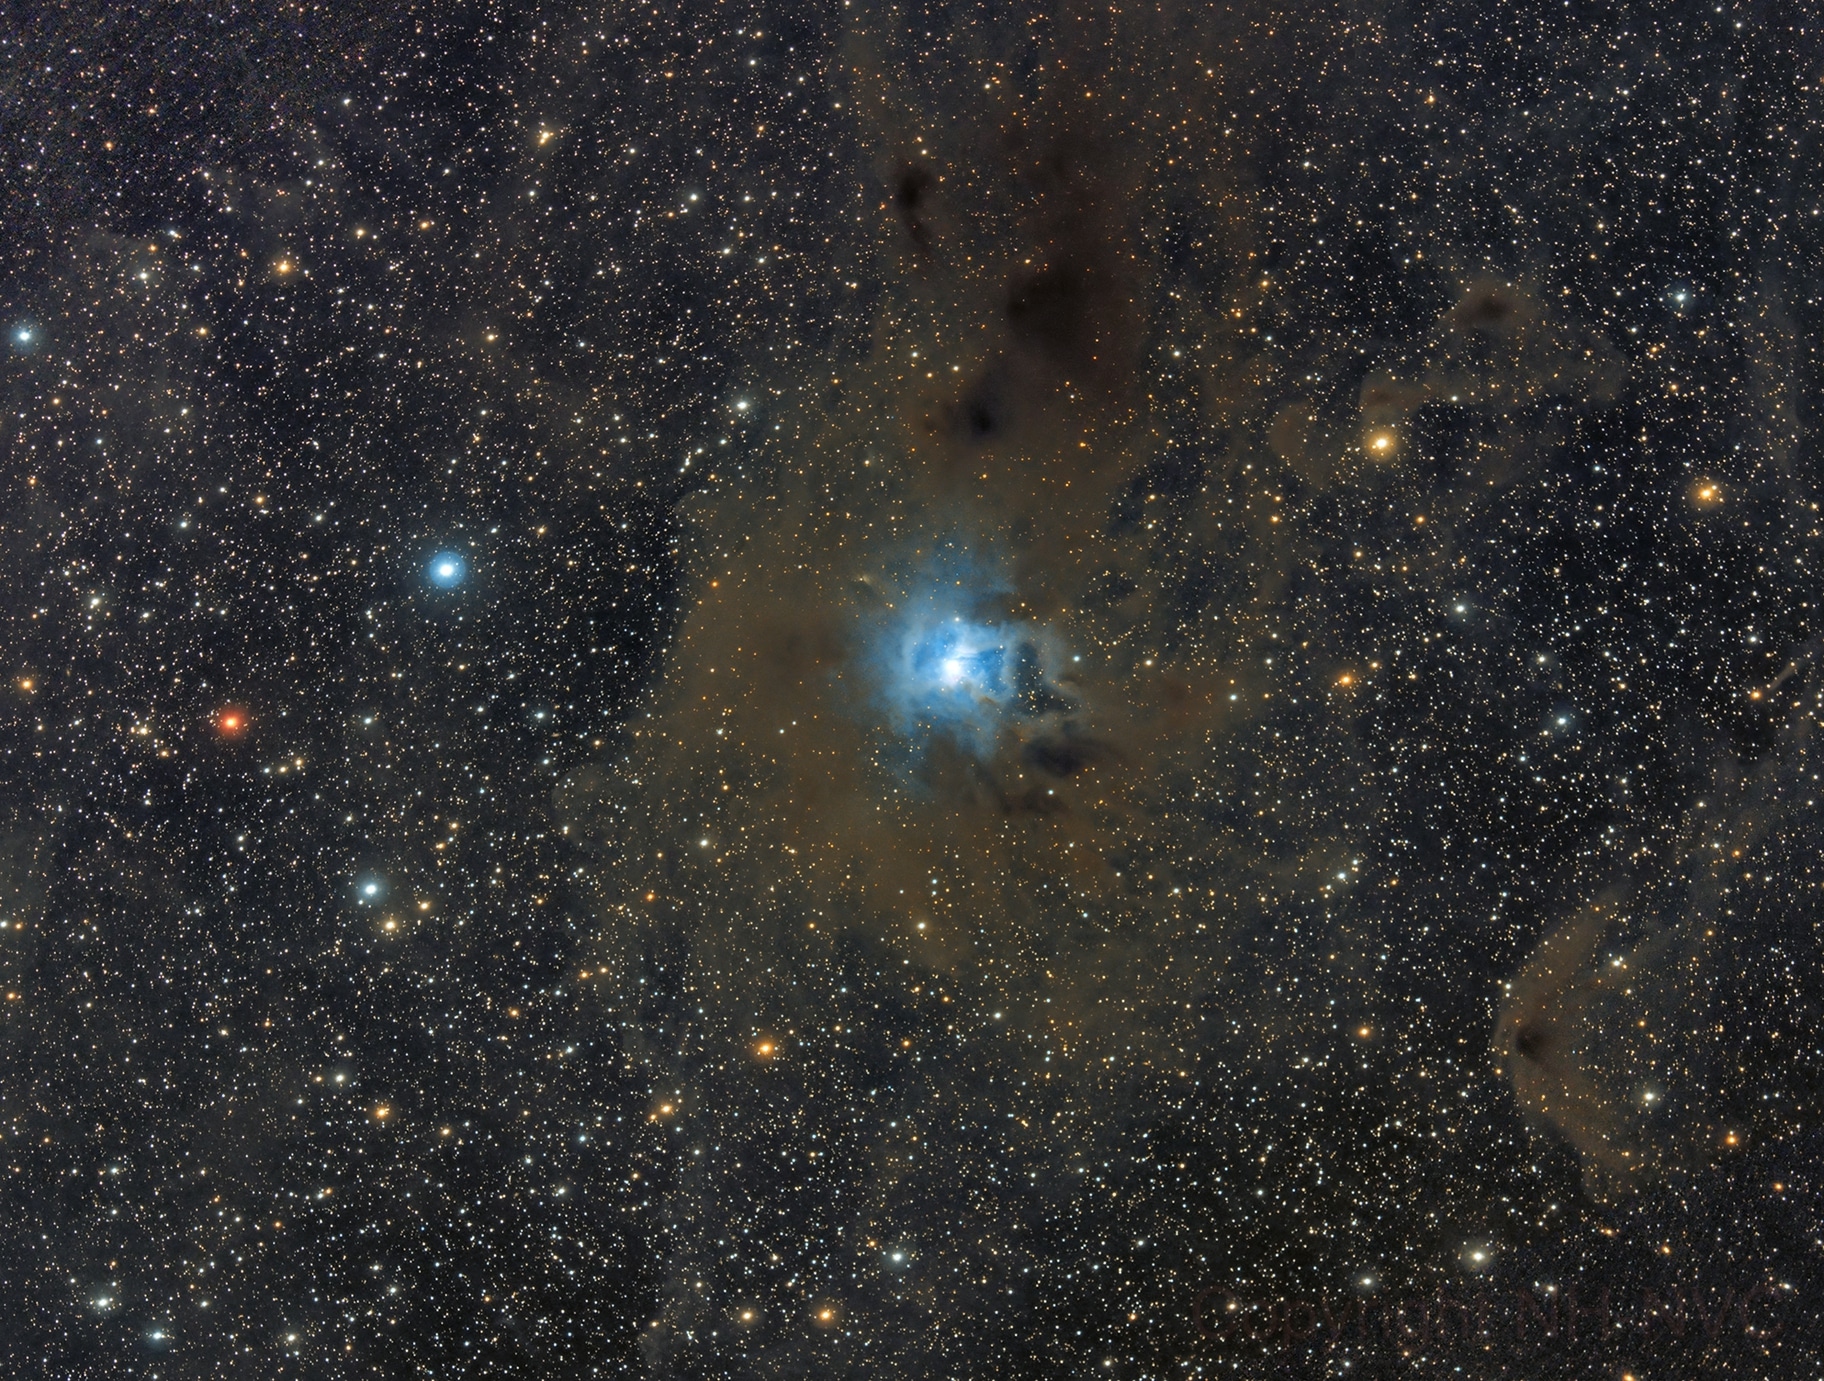 Telescope: Celestron C9.25, Camera: ZWO ASI071MC Pro, Mount: TTS-160 Panther with rOTAtor, Taken by: Niels Haagh and Niels V.